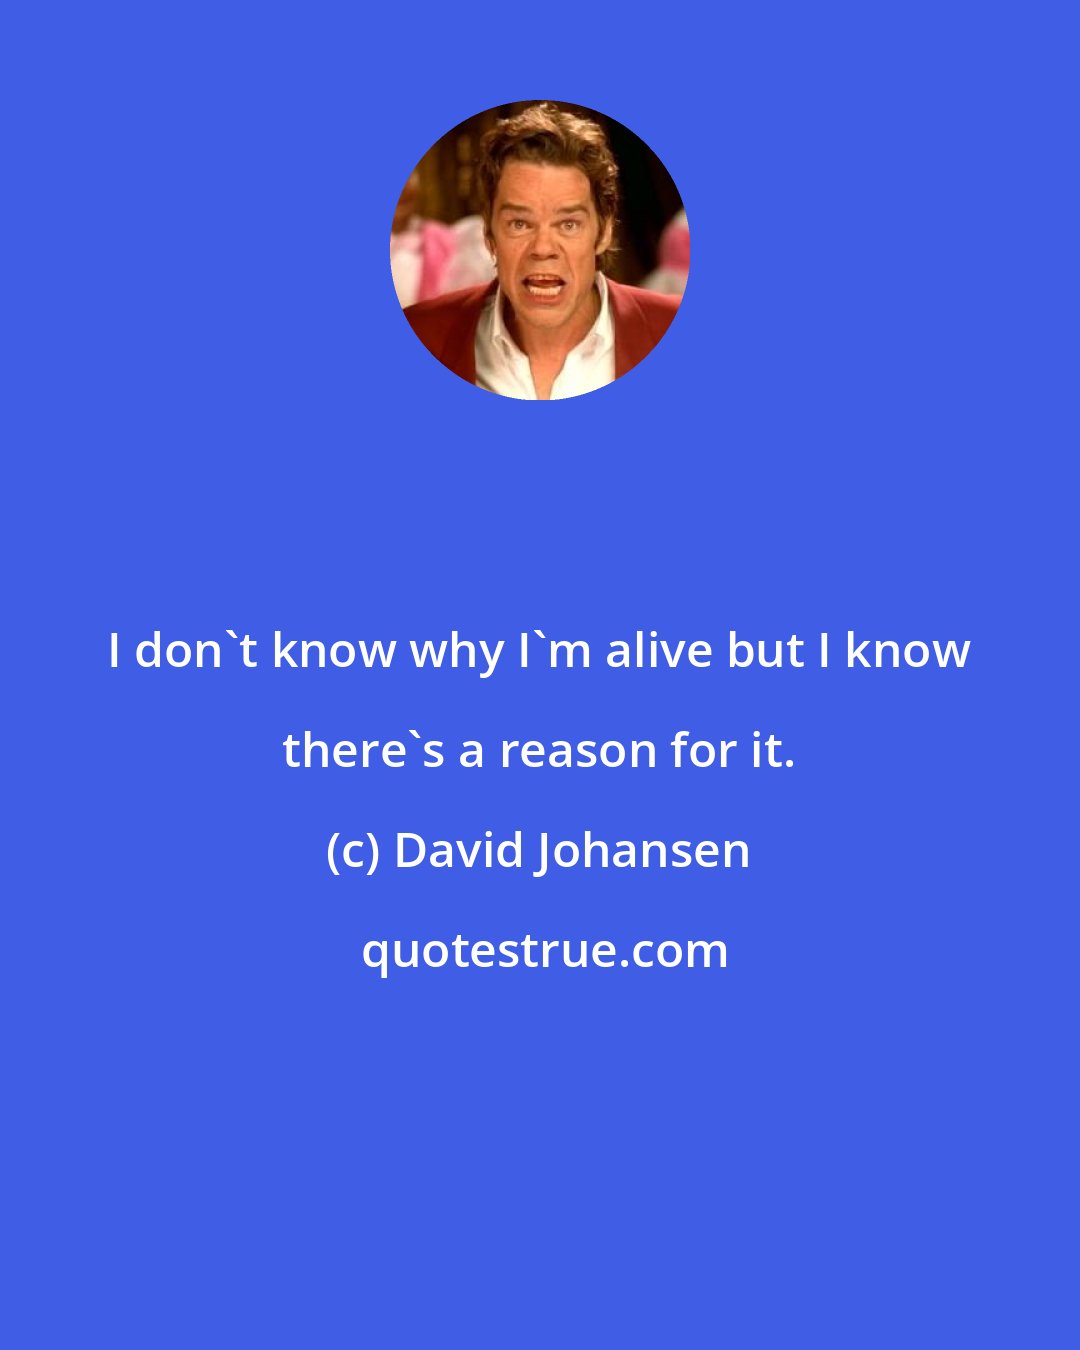 David Johansen: I don't know why I'm alive but I know there's a reason for it.